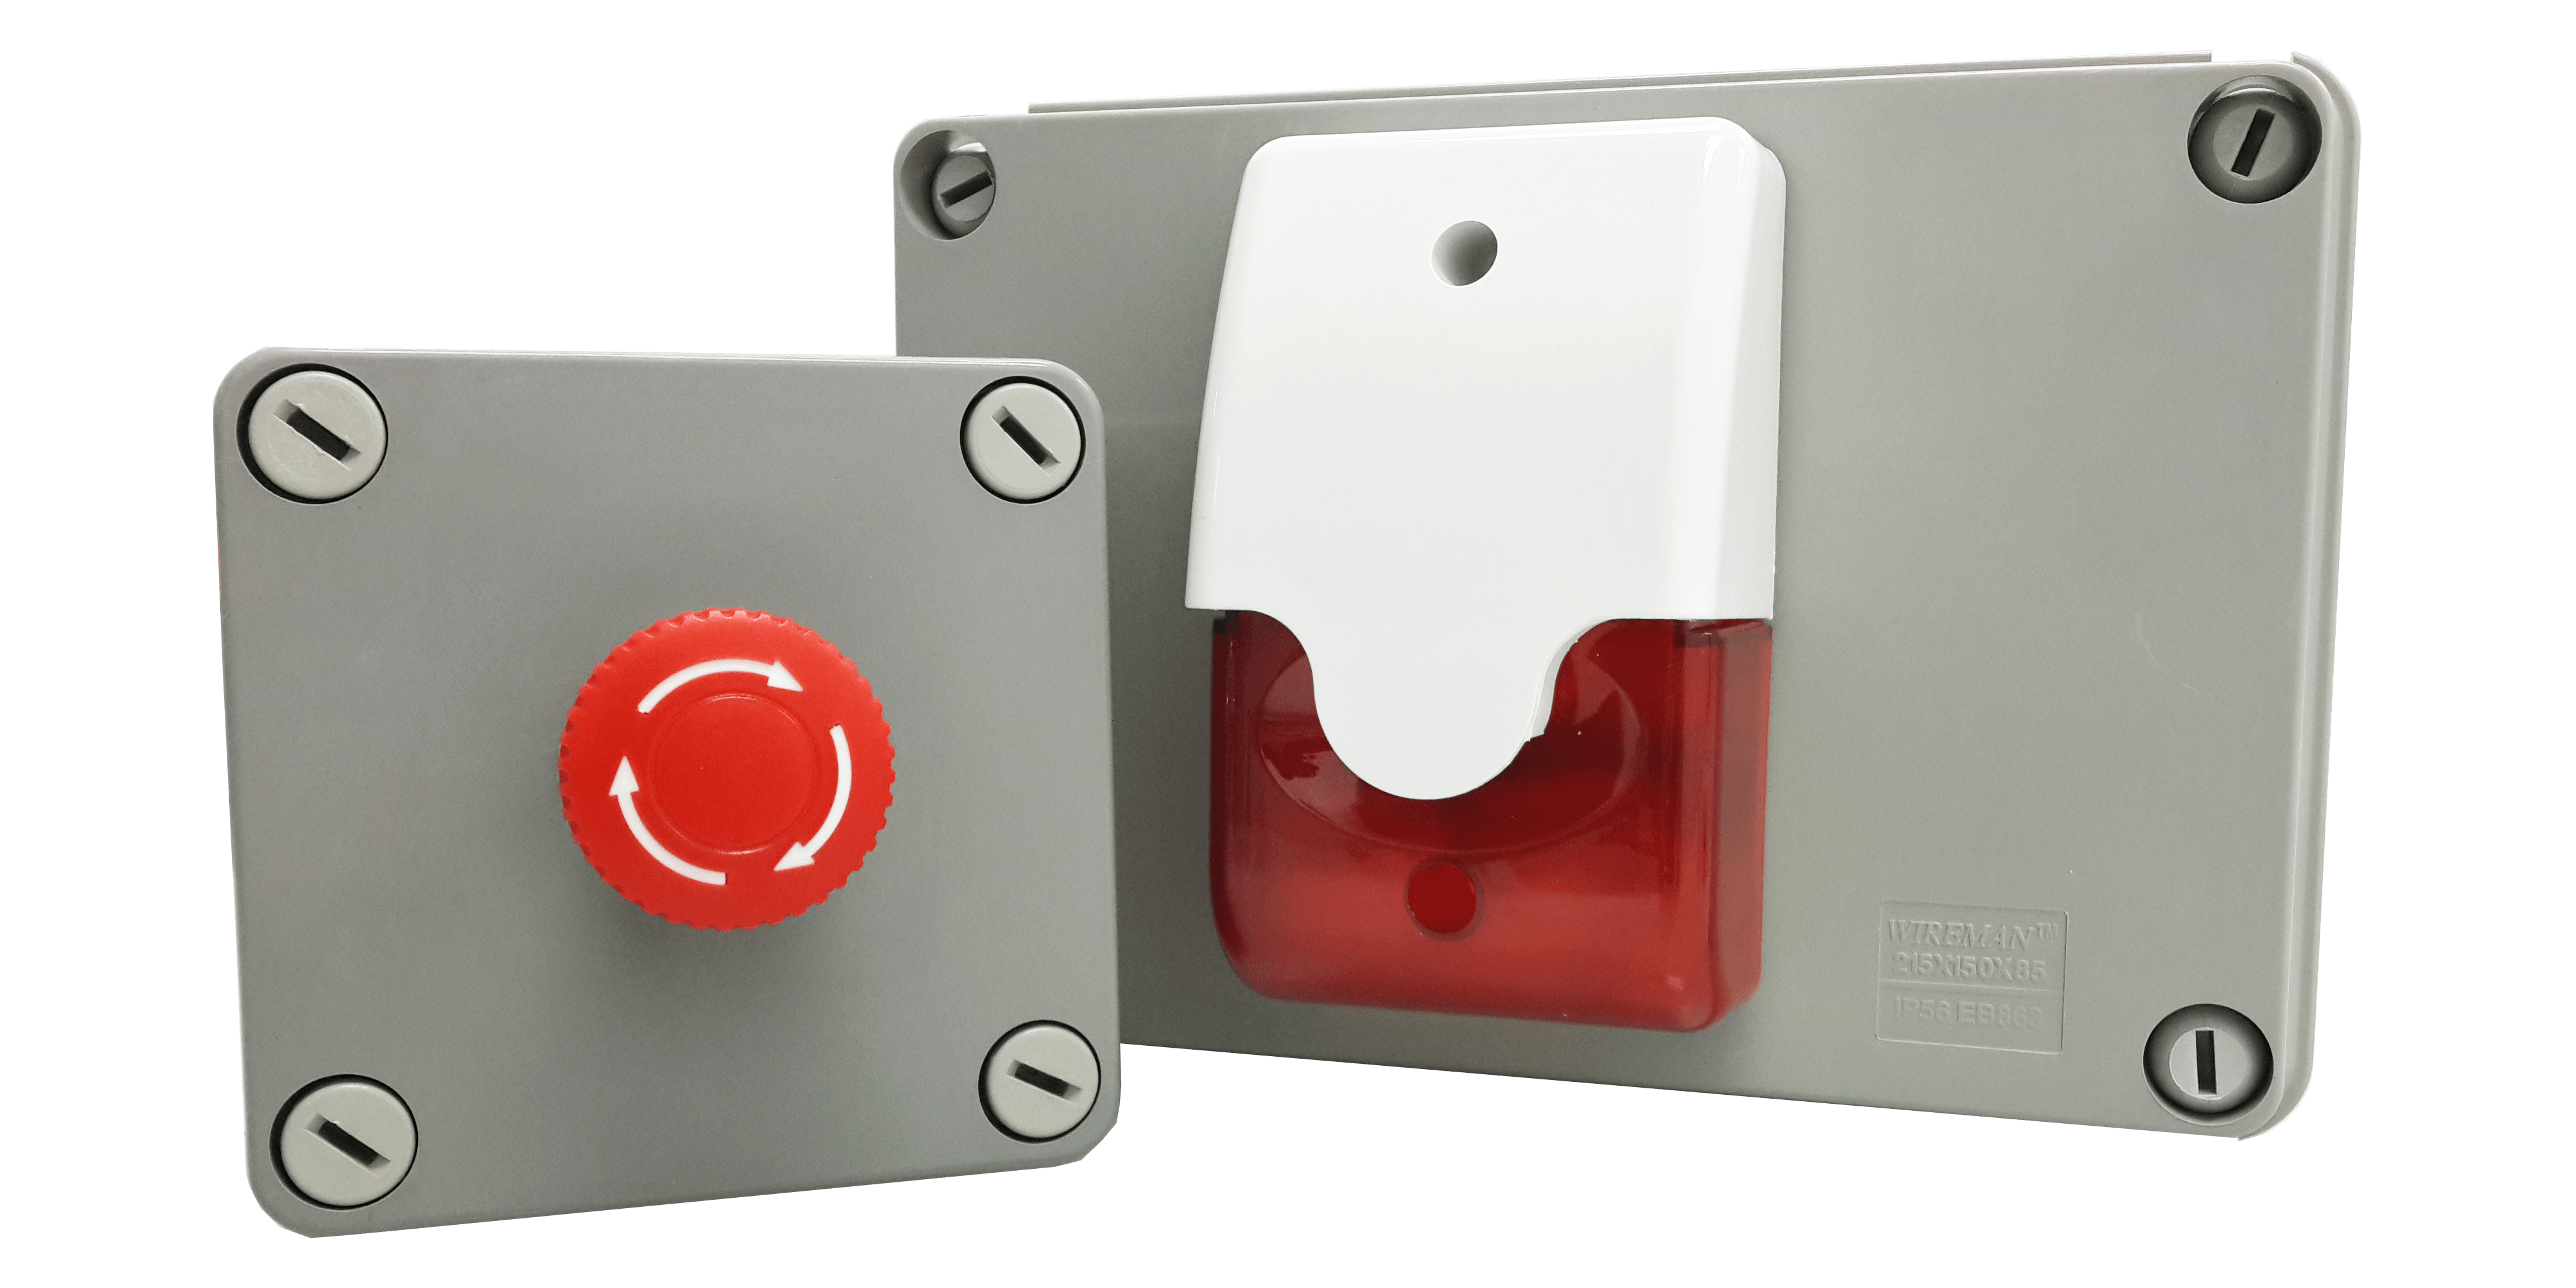 panic button system for car park in usa